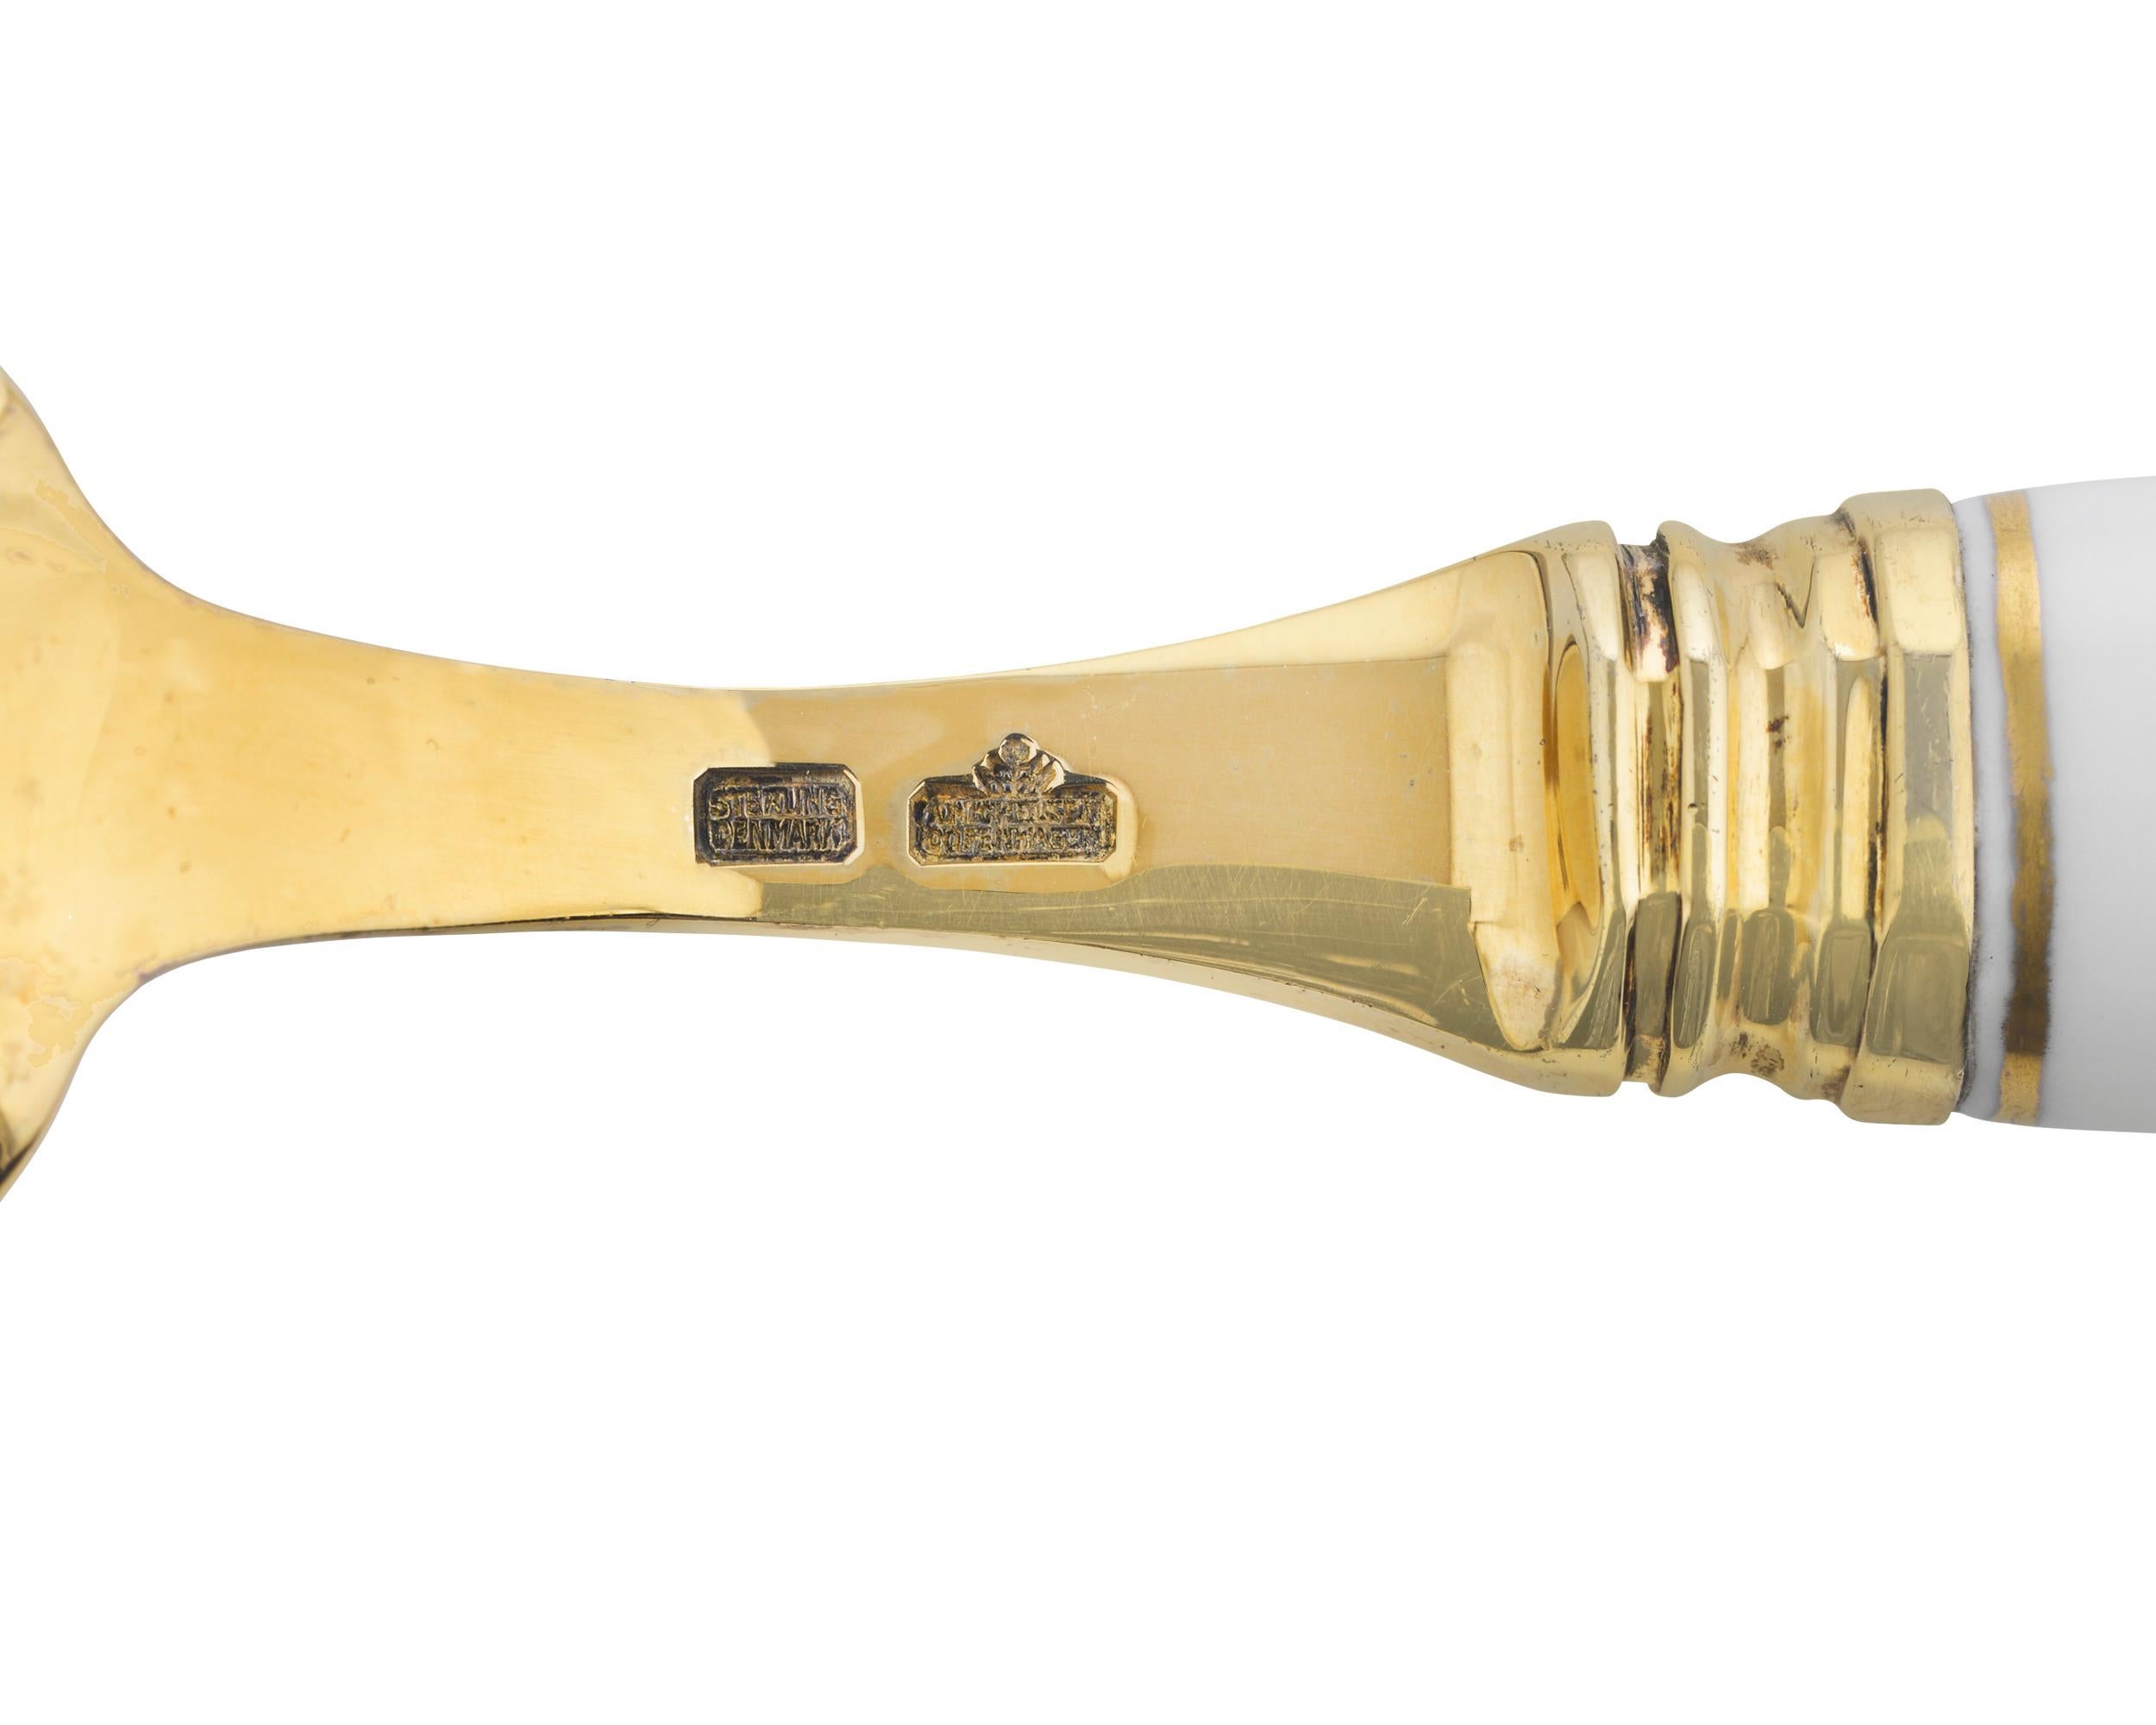 This charming porcelain and silver gilt spoon is part of the celebrated Flora Danica line created by Royal Copenhagen. Once the supplier of the Queen of Denmark, this important firm has been synonymous with royalty and prestige for centuries. Their